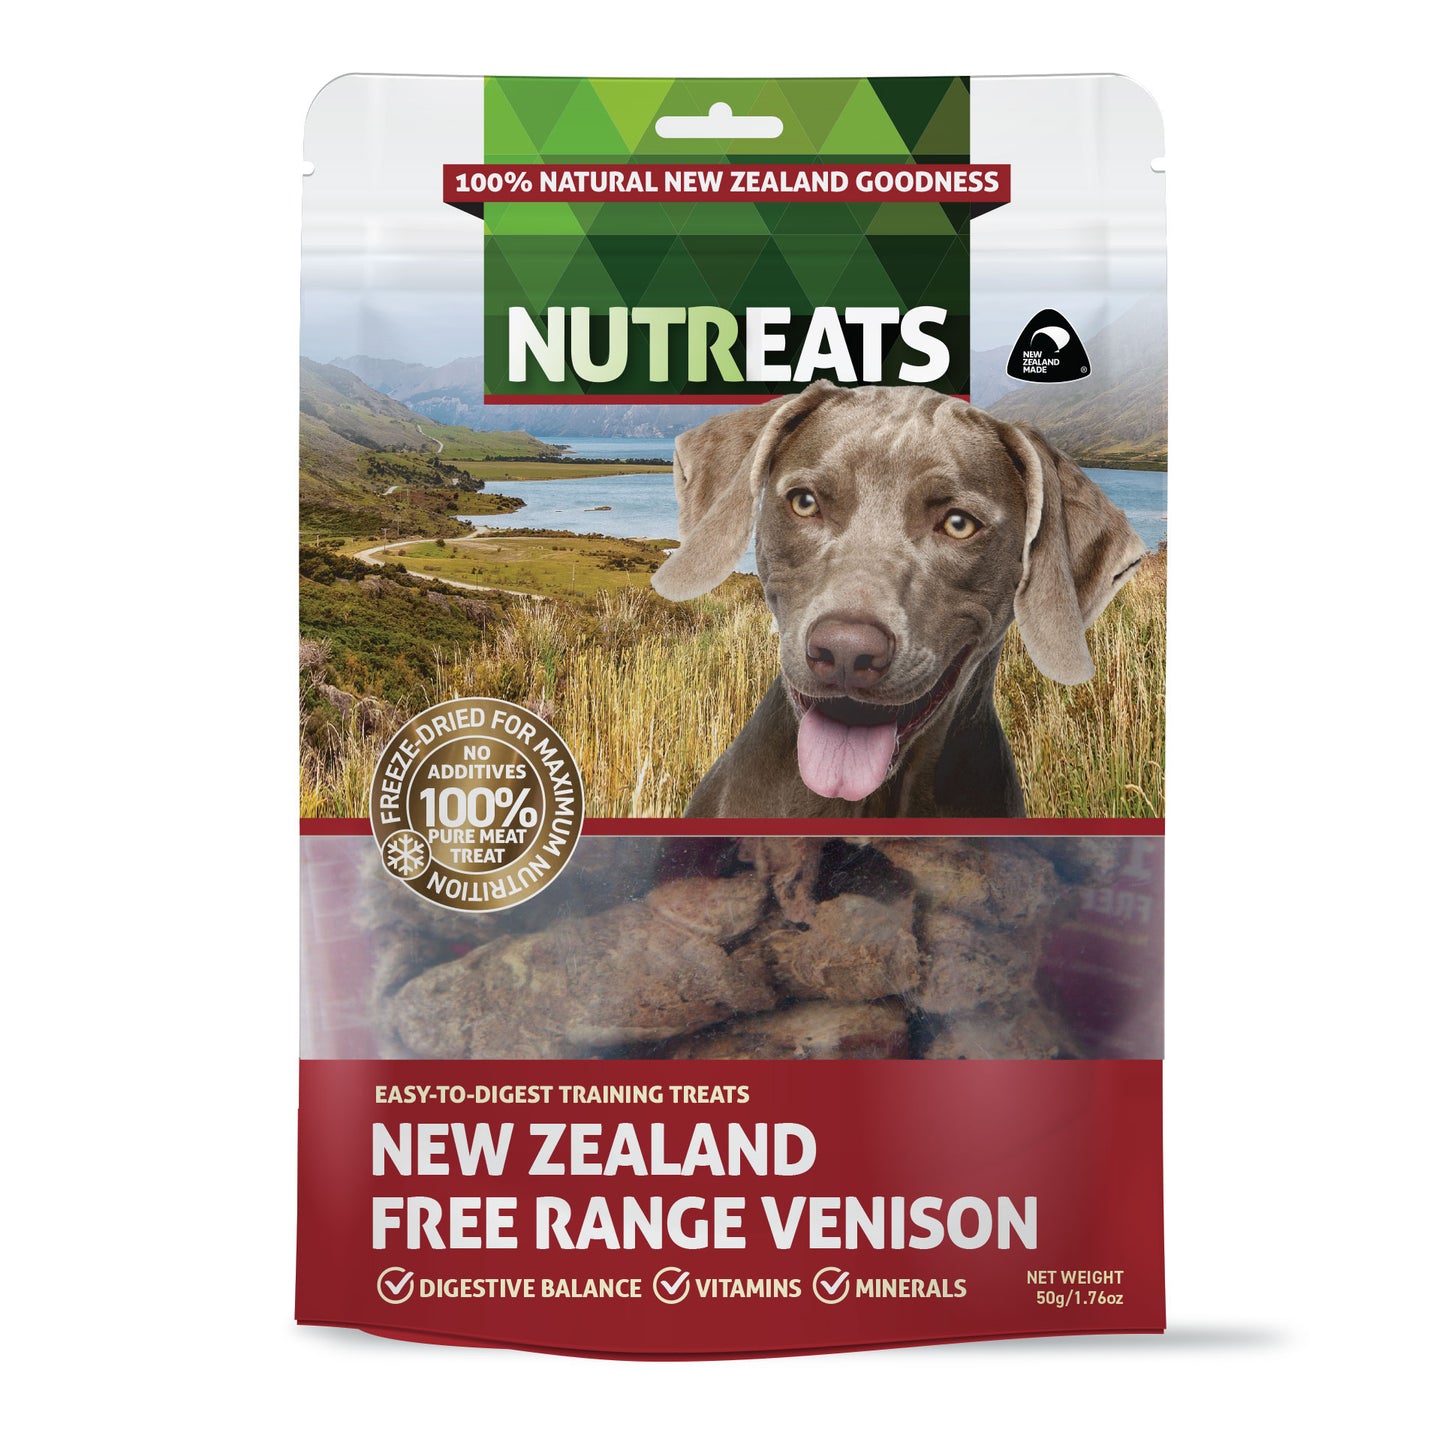 New Zealand Free Range Venison dog treats. Easy to digest and supporting naturally healthy digestion, rich in minerals and vitamins. This 100% natural treat made with premium free range New Zealand venison for your dog.